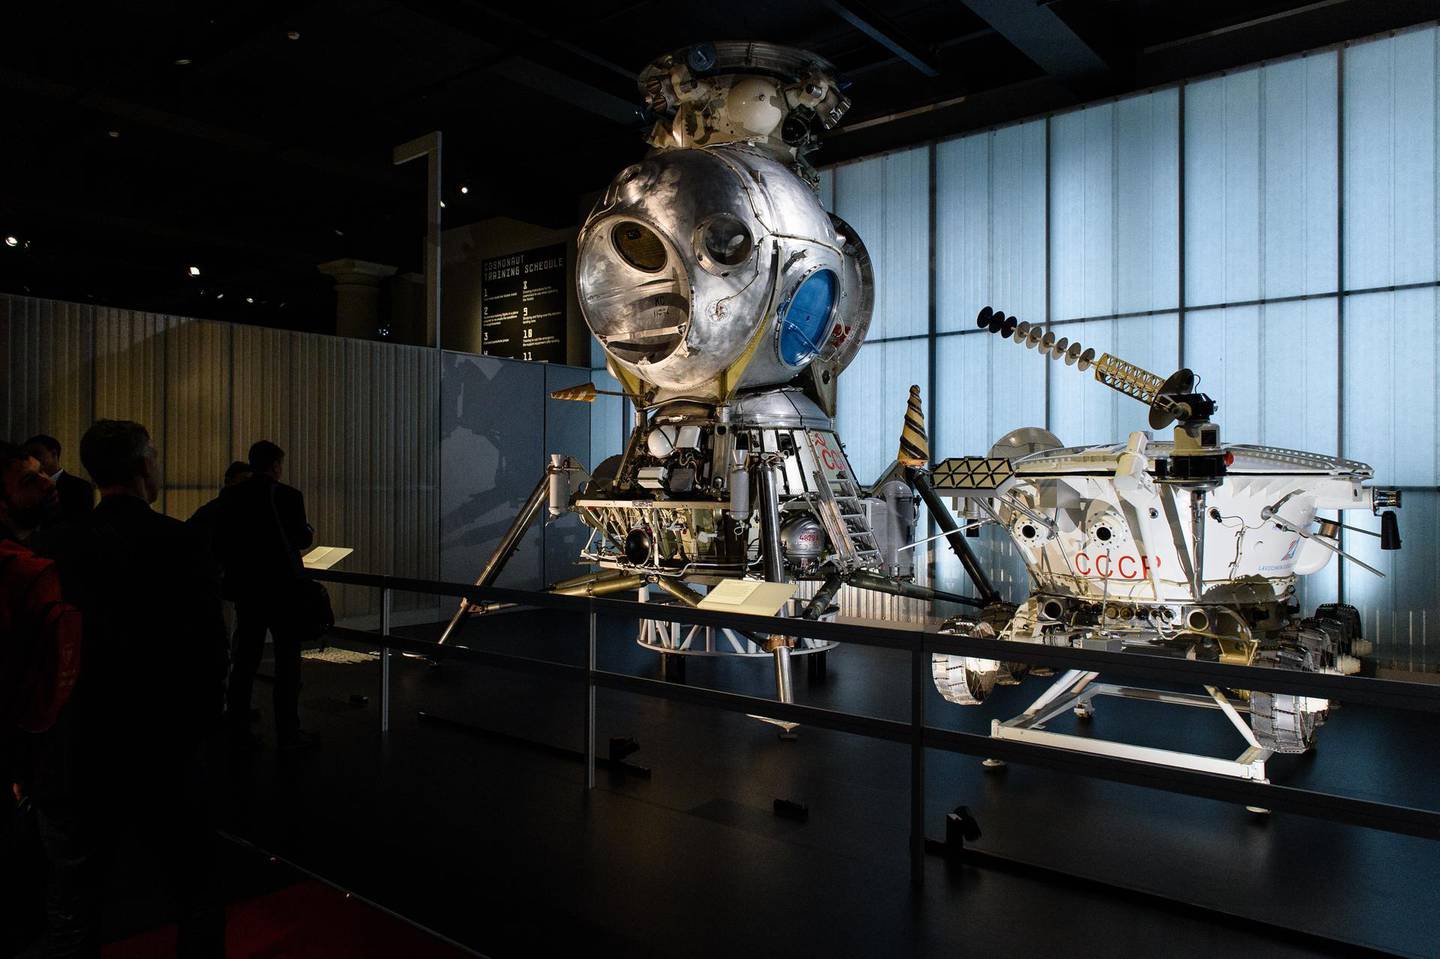 The LK-3 lunar lander from 1969 (L) and the Lunokhod 1 lunar roving vehicle from 1970 are displayed in London on September 17, 2015, during a press preview for the Science Museum's latest exhibition "Cosmonaut". The exhibition charts Russia's space programme, from early theories and predictions by artists and scientists through to recent work on the International Space Station. The exhibition is due to run from September 18, 2015 to March 13, 2016.    AFP PHOTO / LEON NEAL (Photo by LEON NEAL / AFP)